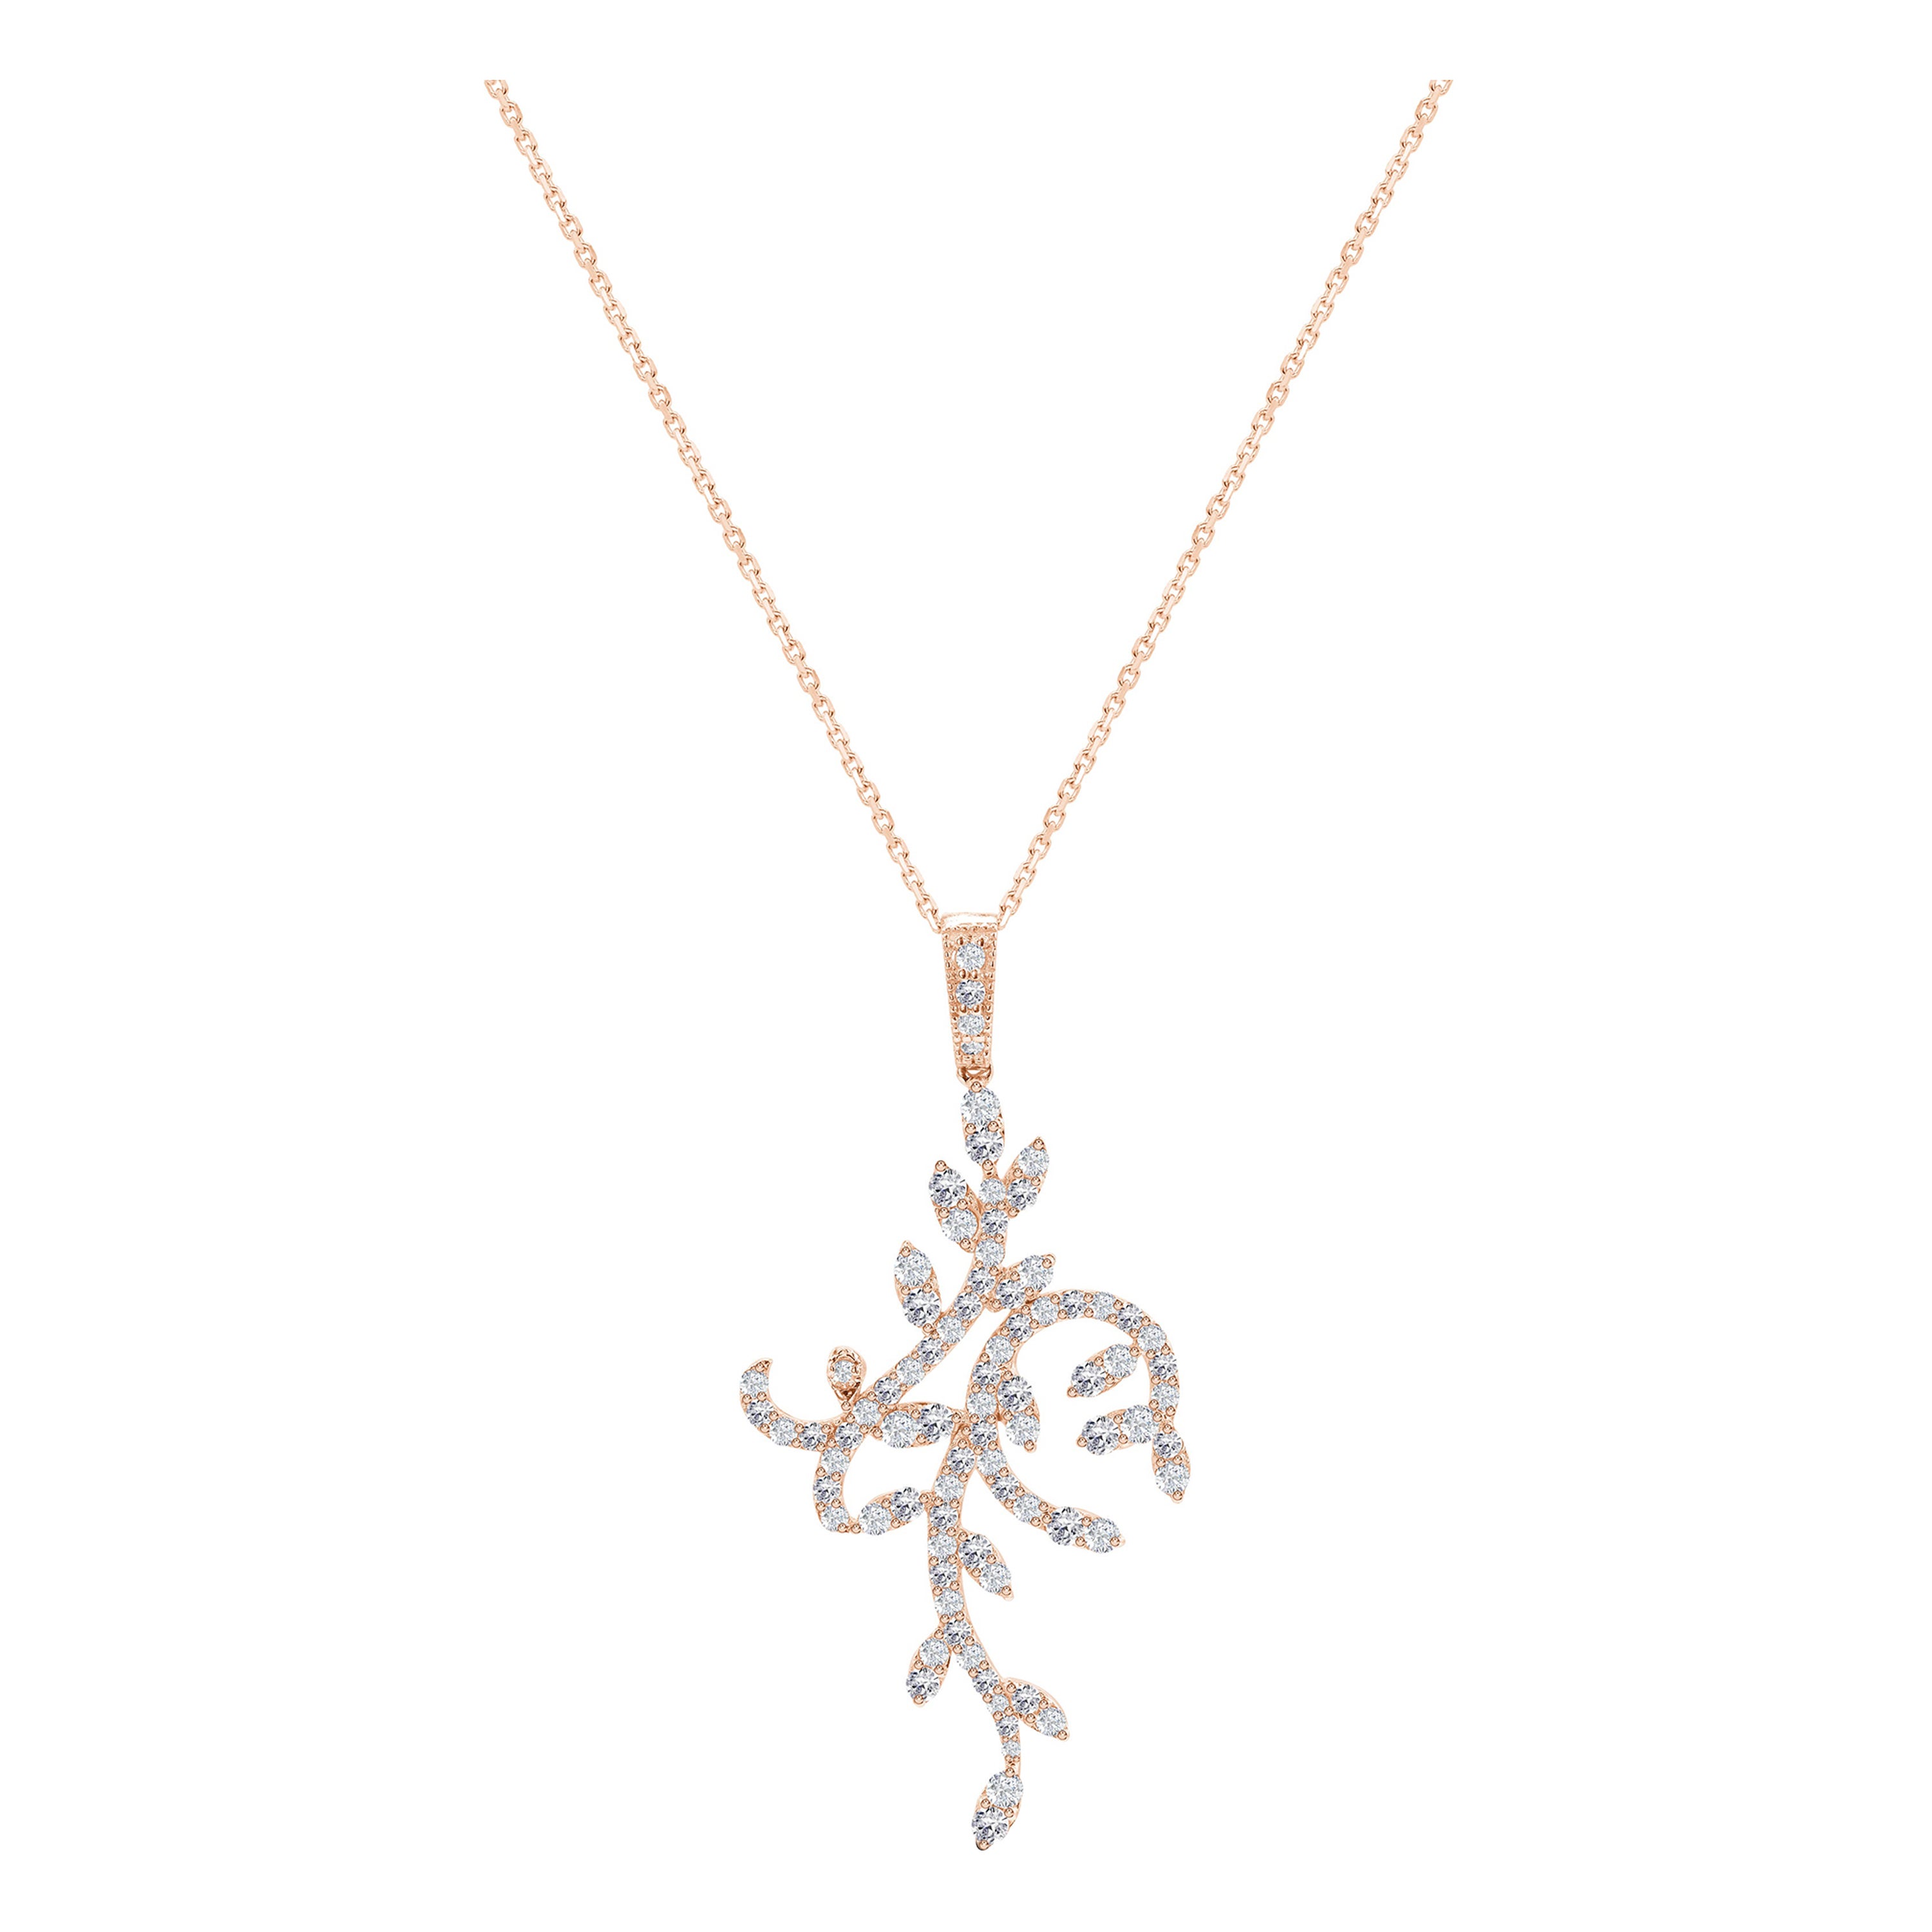 1.35 Ct Diamond Leaf Necklace in 14K Gold